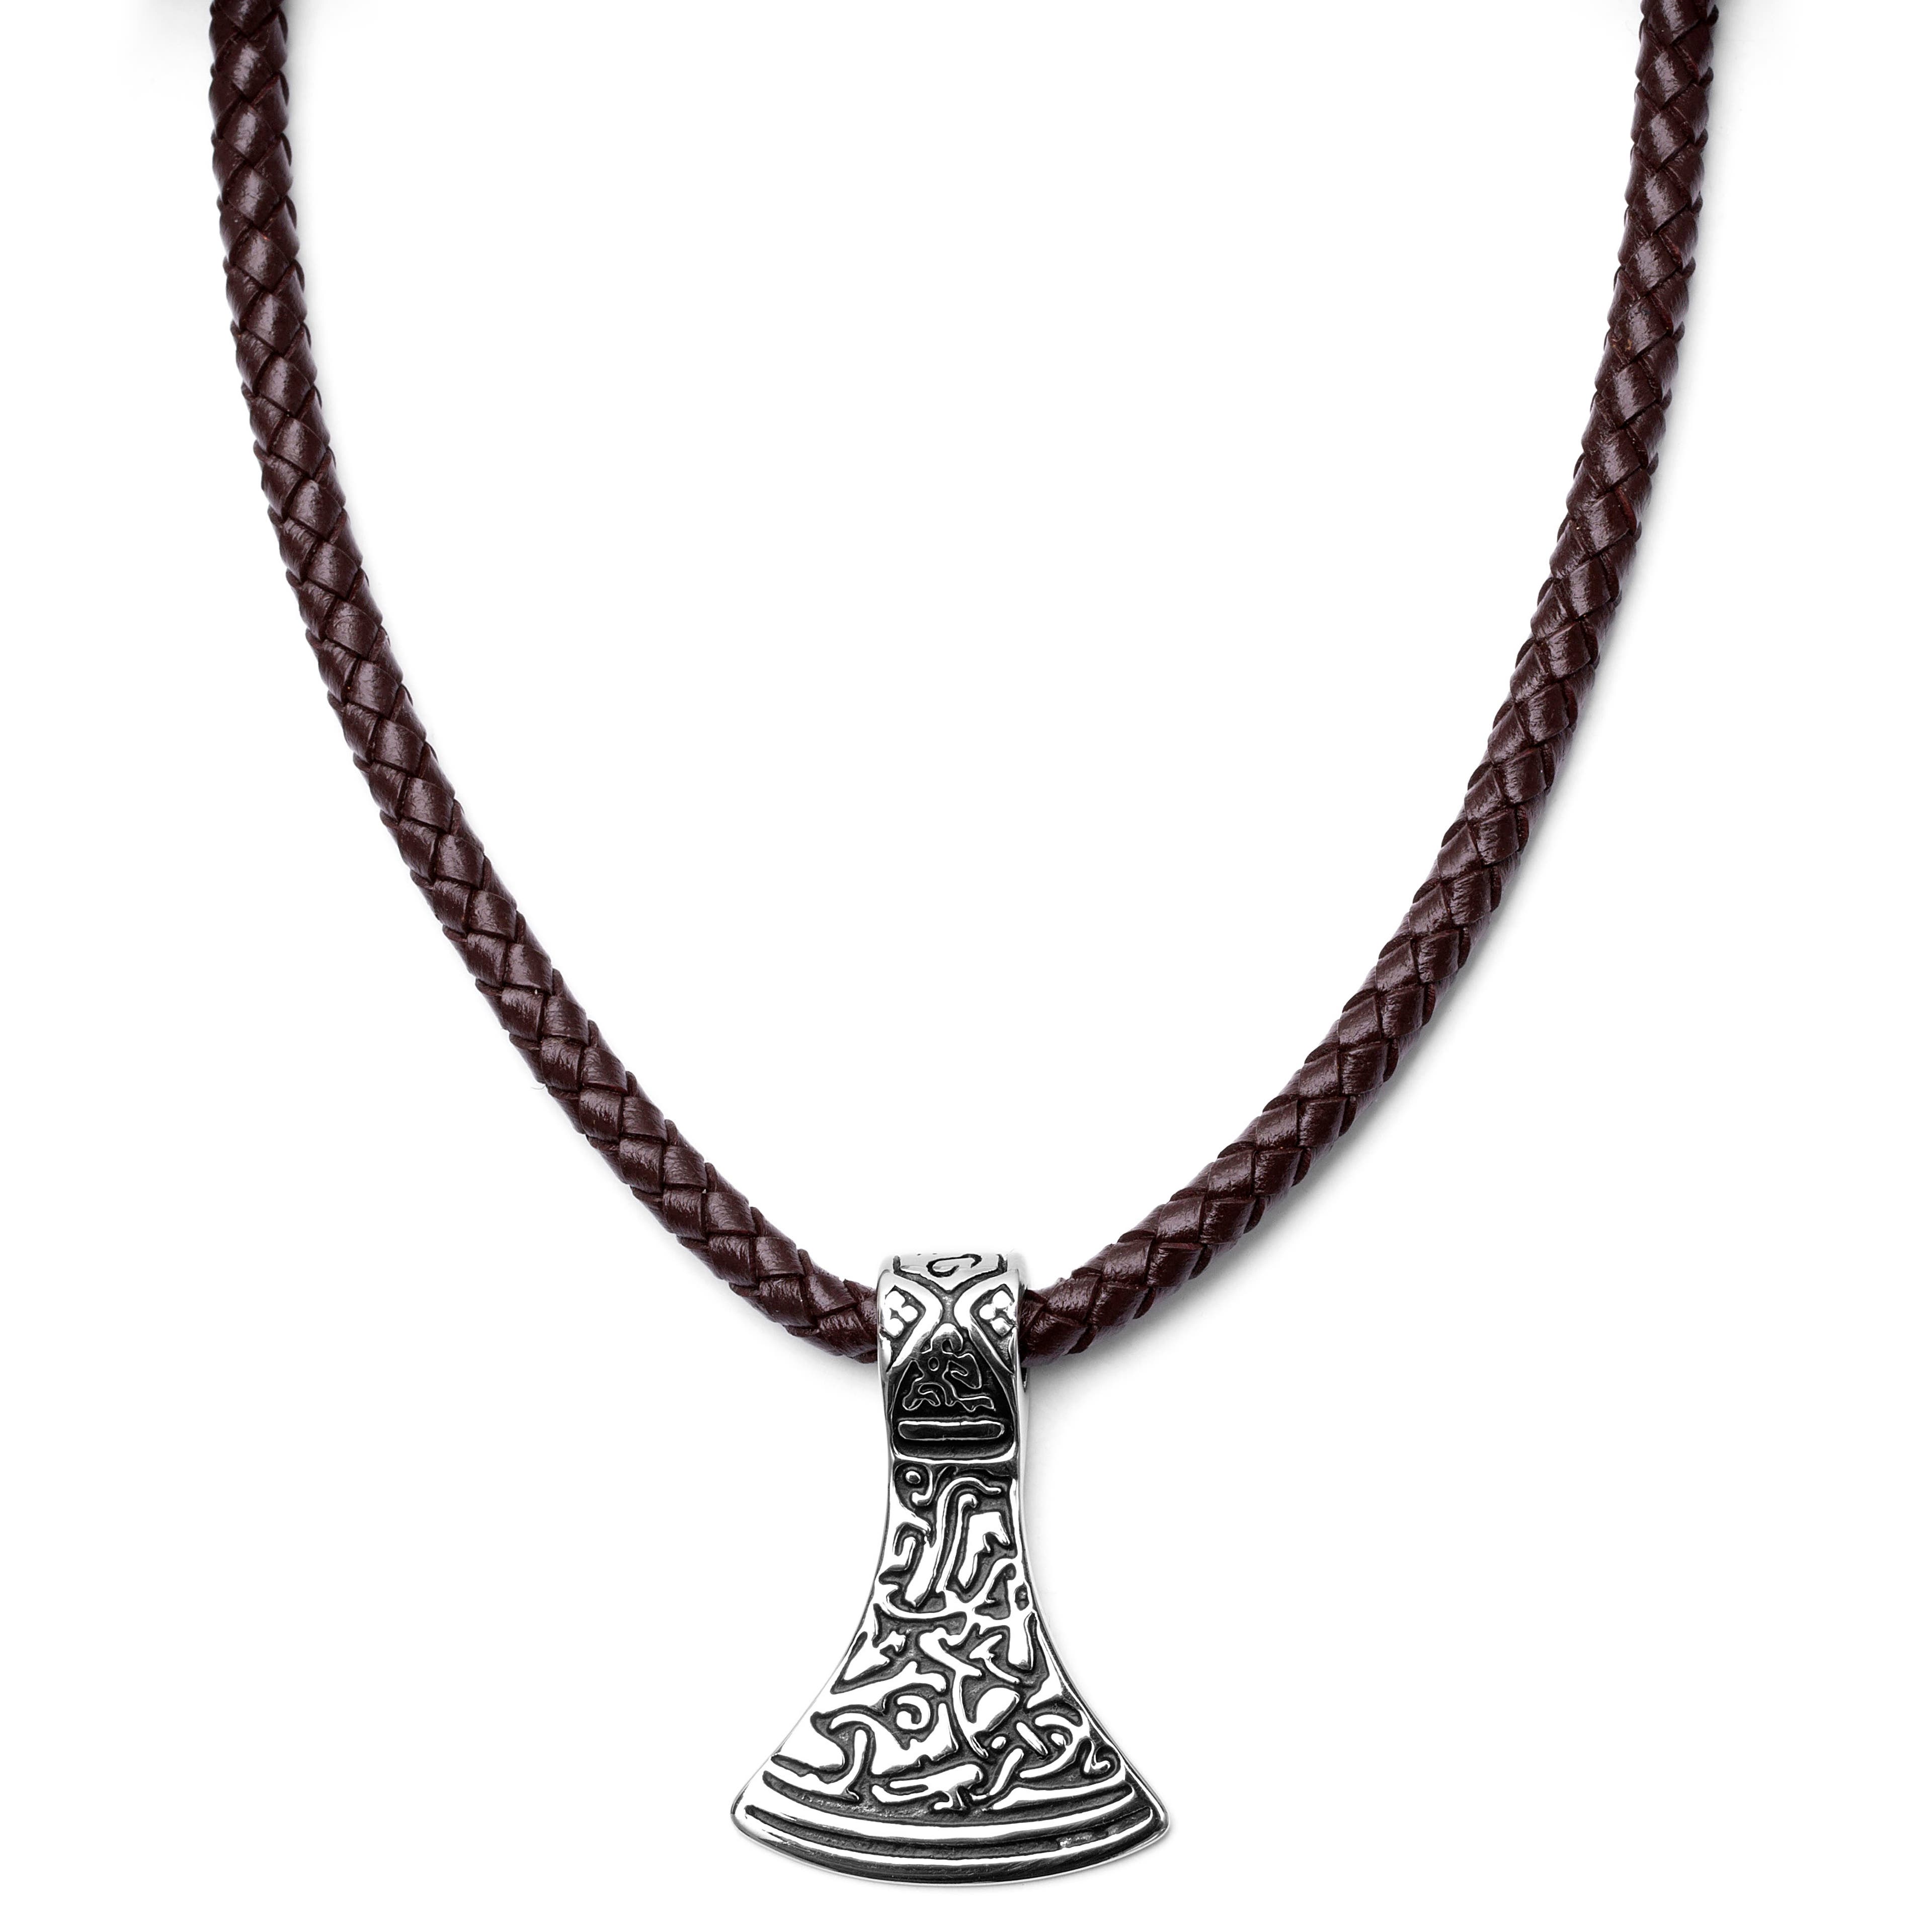 Leather Cord Charm Necklace Brown / Silver Tone